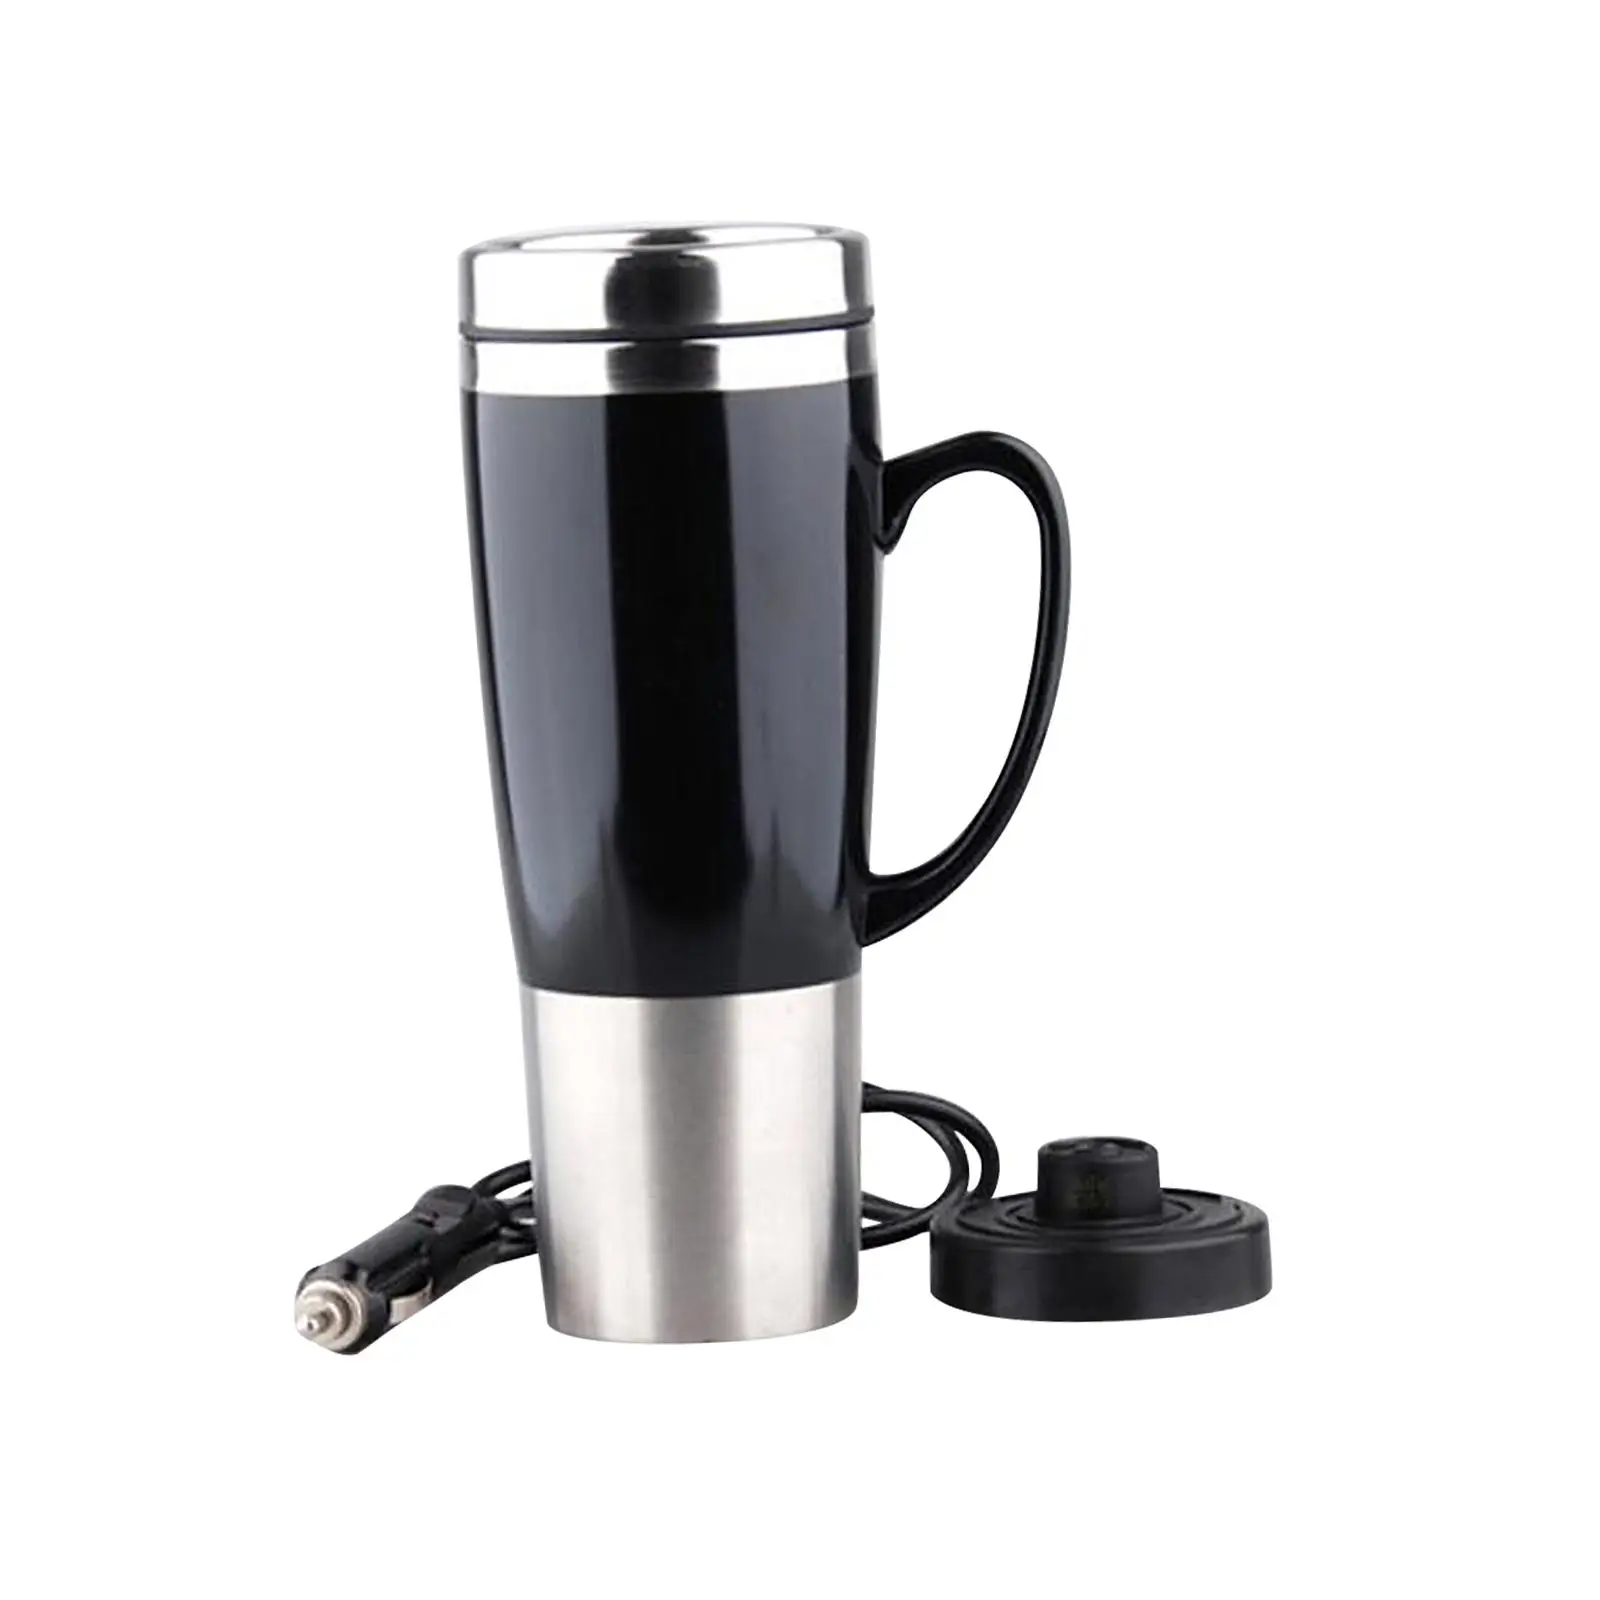 Hot Water Heater Mug for Car Automobile Electric Heating Kettle Stainless Steel Mug Quick Boiling 12V Electric Heated Travel Mug